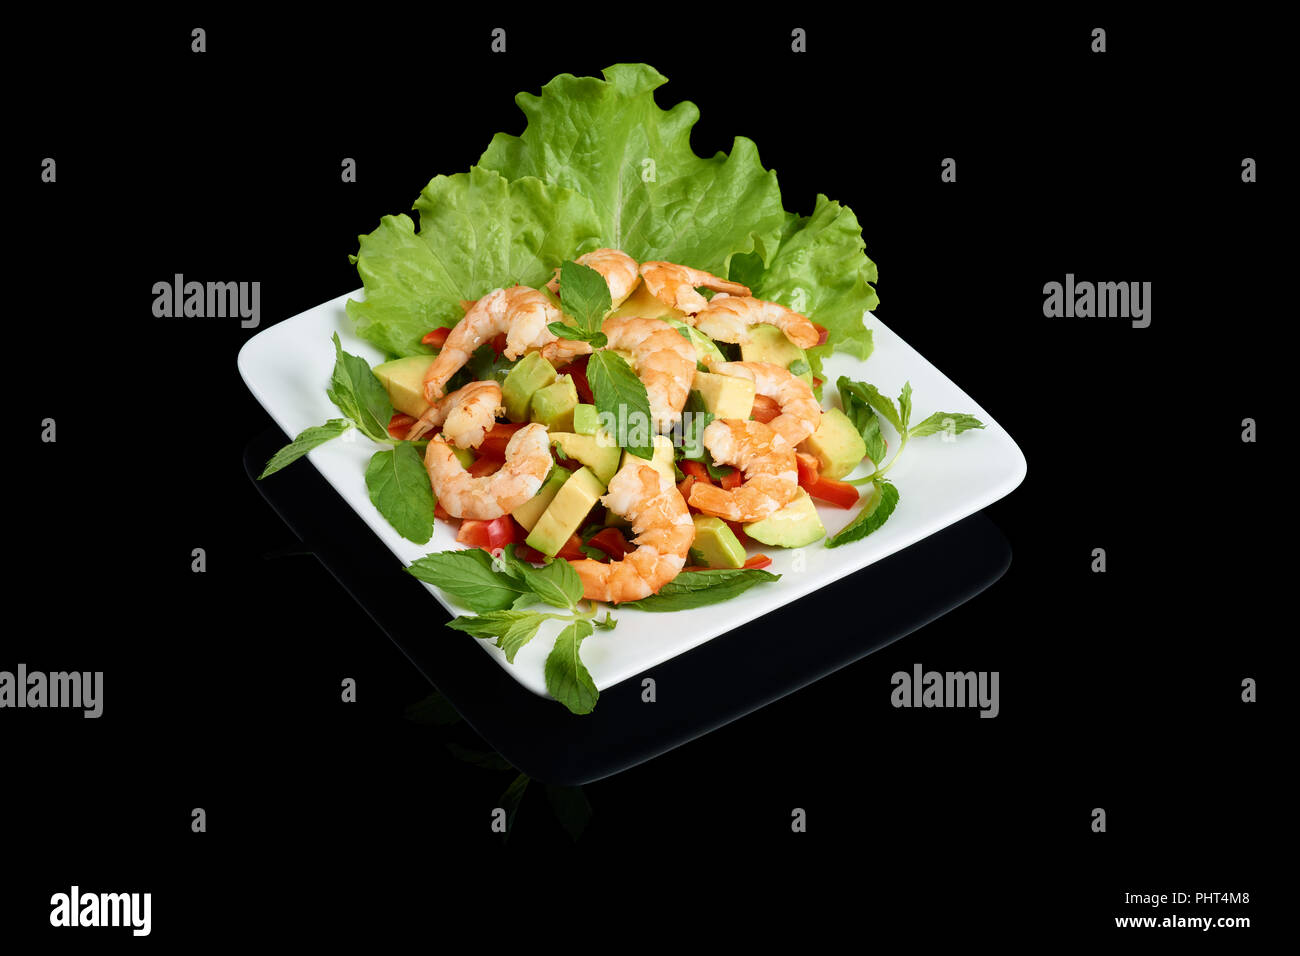 Vietnamese cuisine Avocado salad with shrimps with vegetables on rectangular white plate isolated on black reflective background Stock Photo